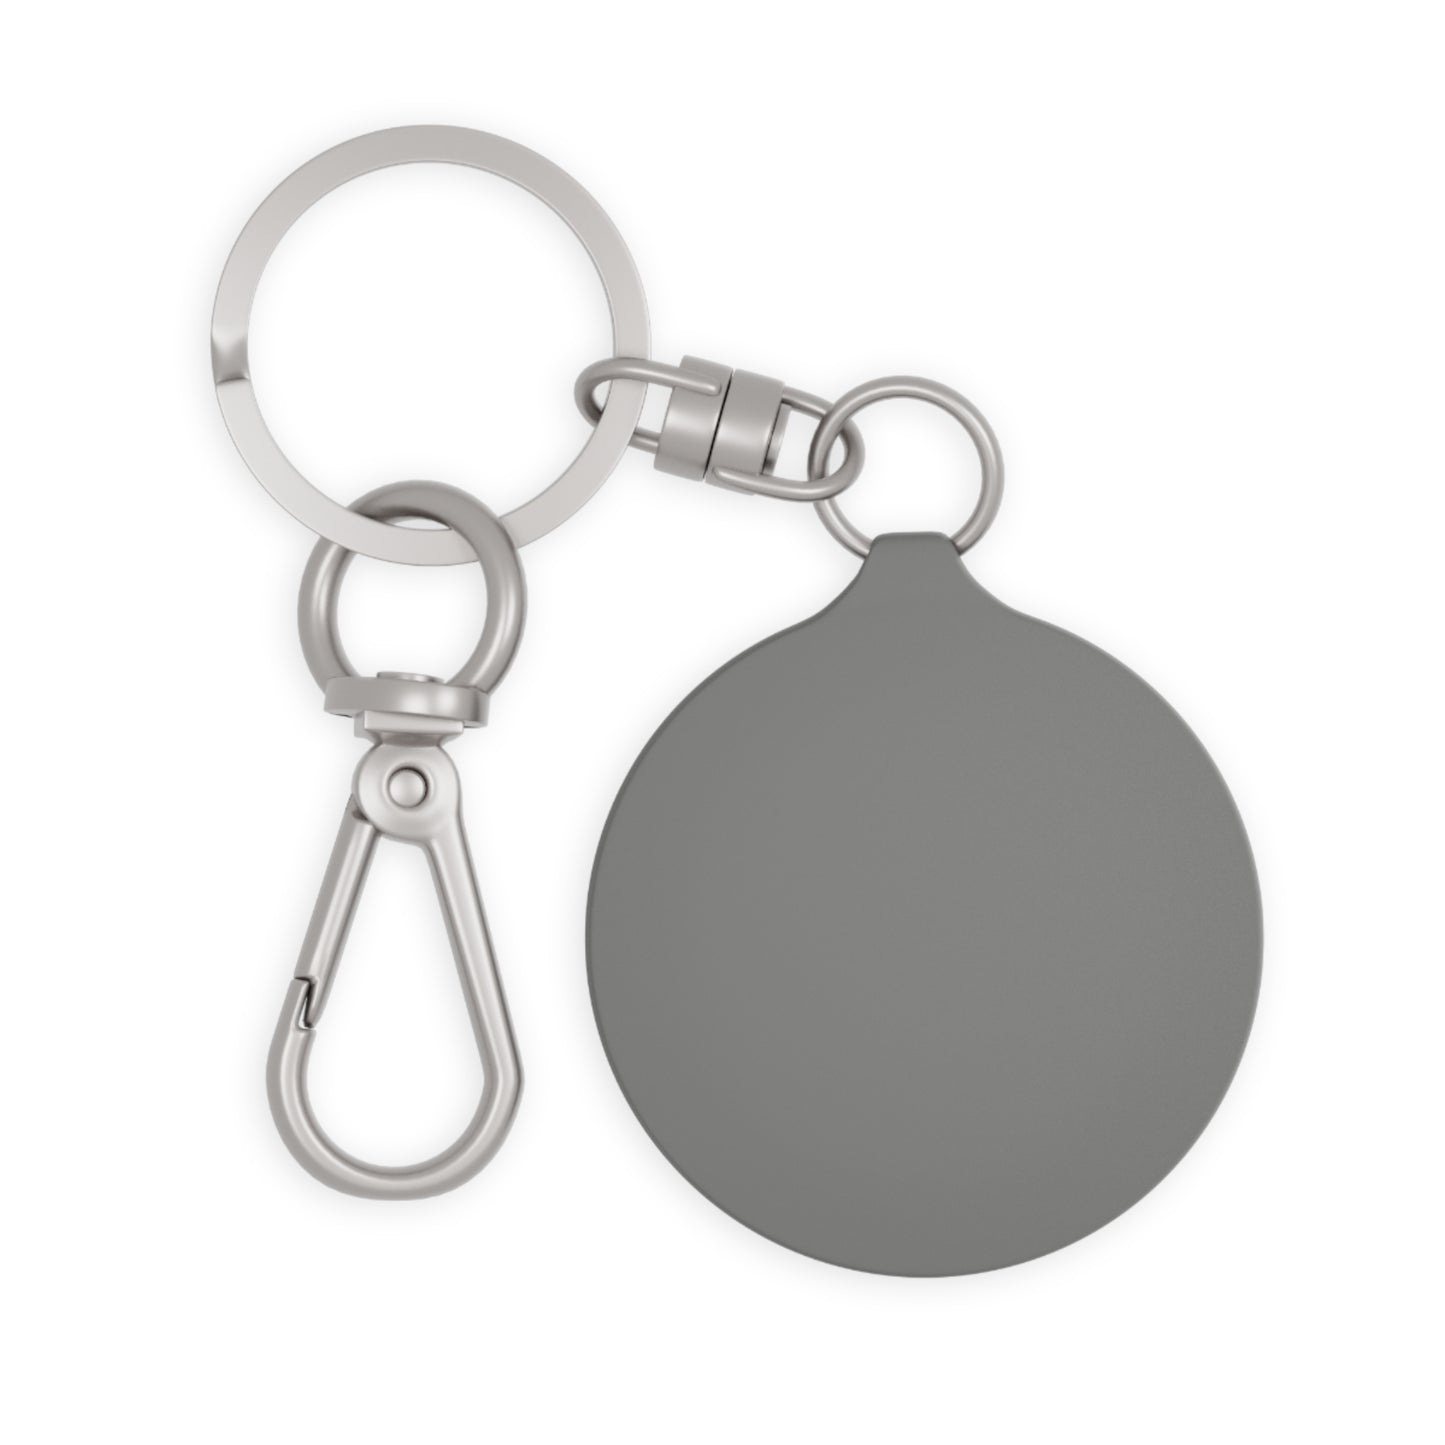 The Golden Collection Keyring Tag